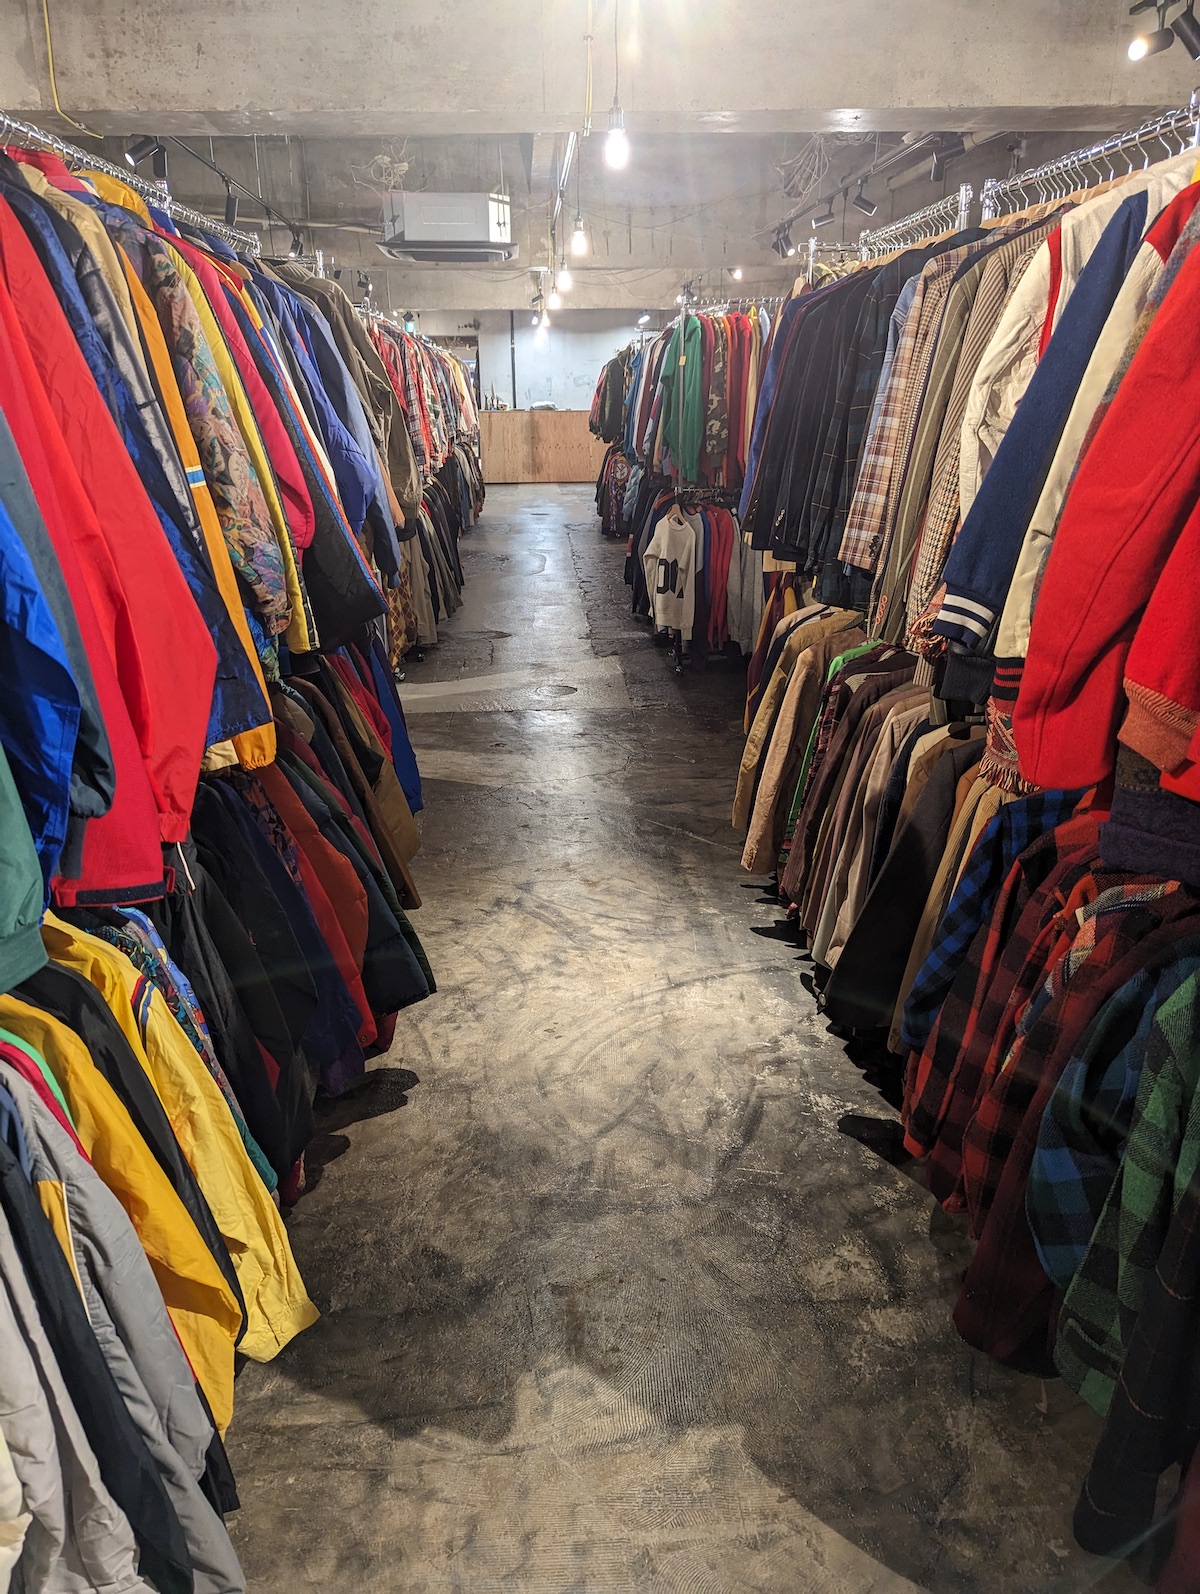 What is considered vintage clothing?